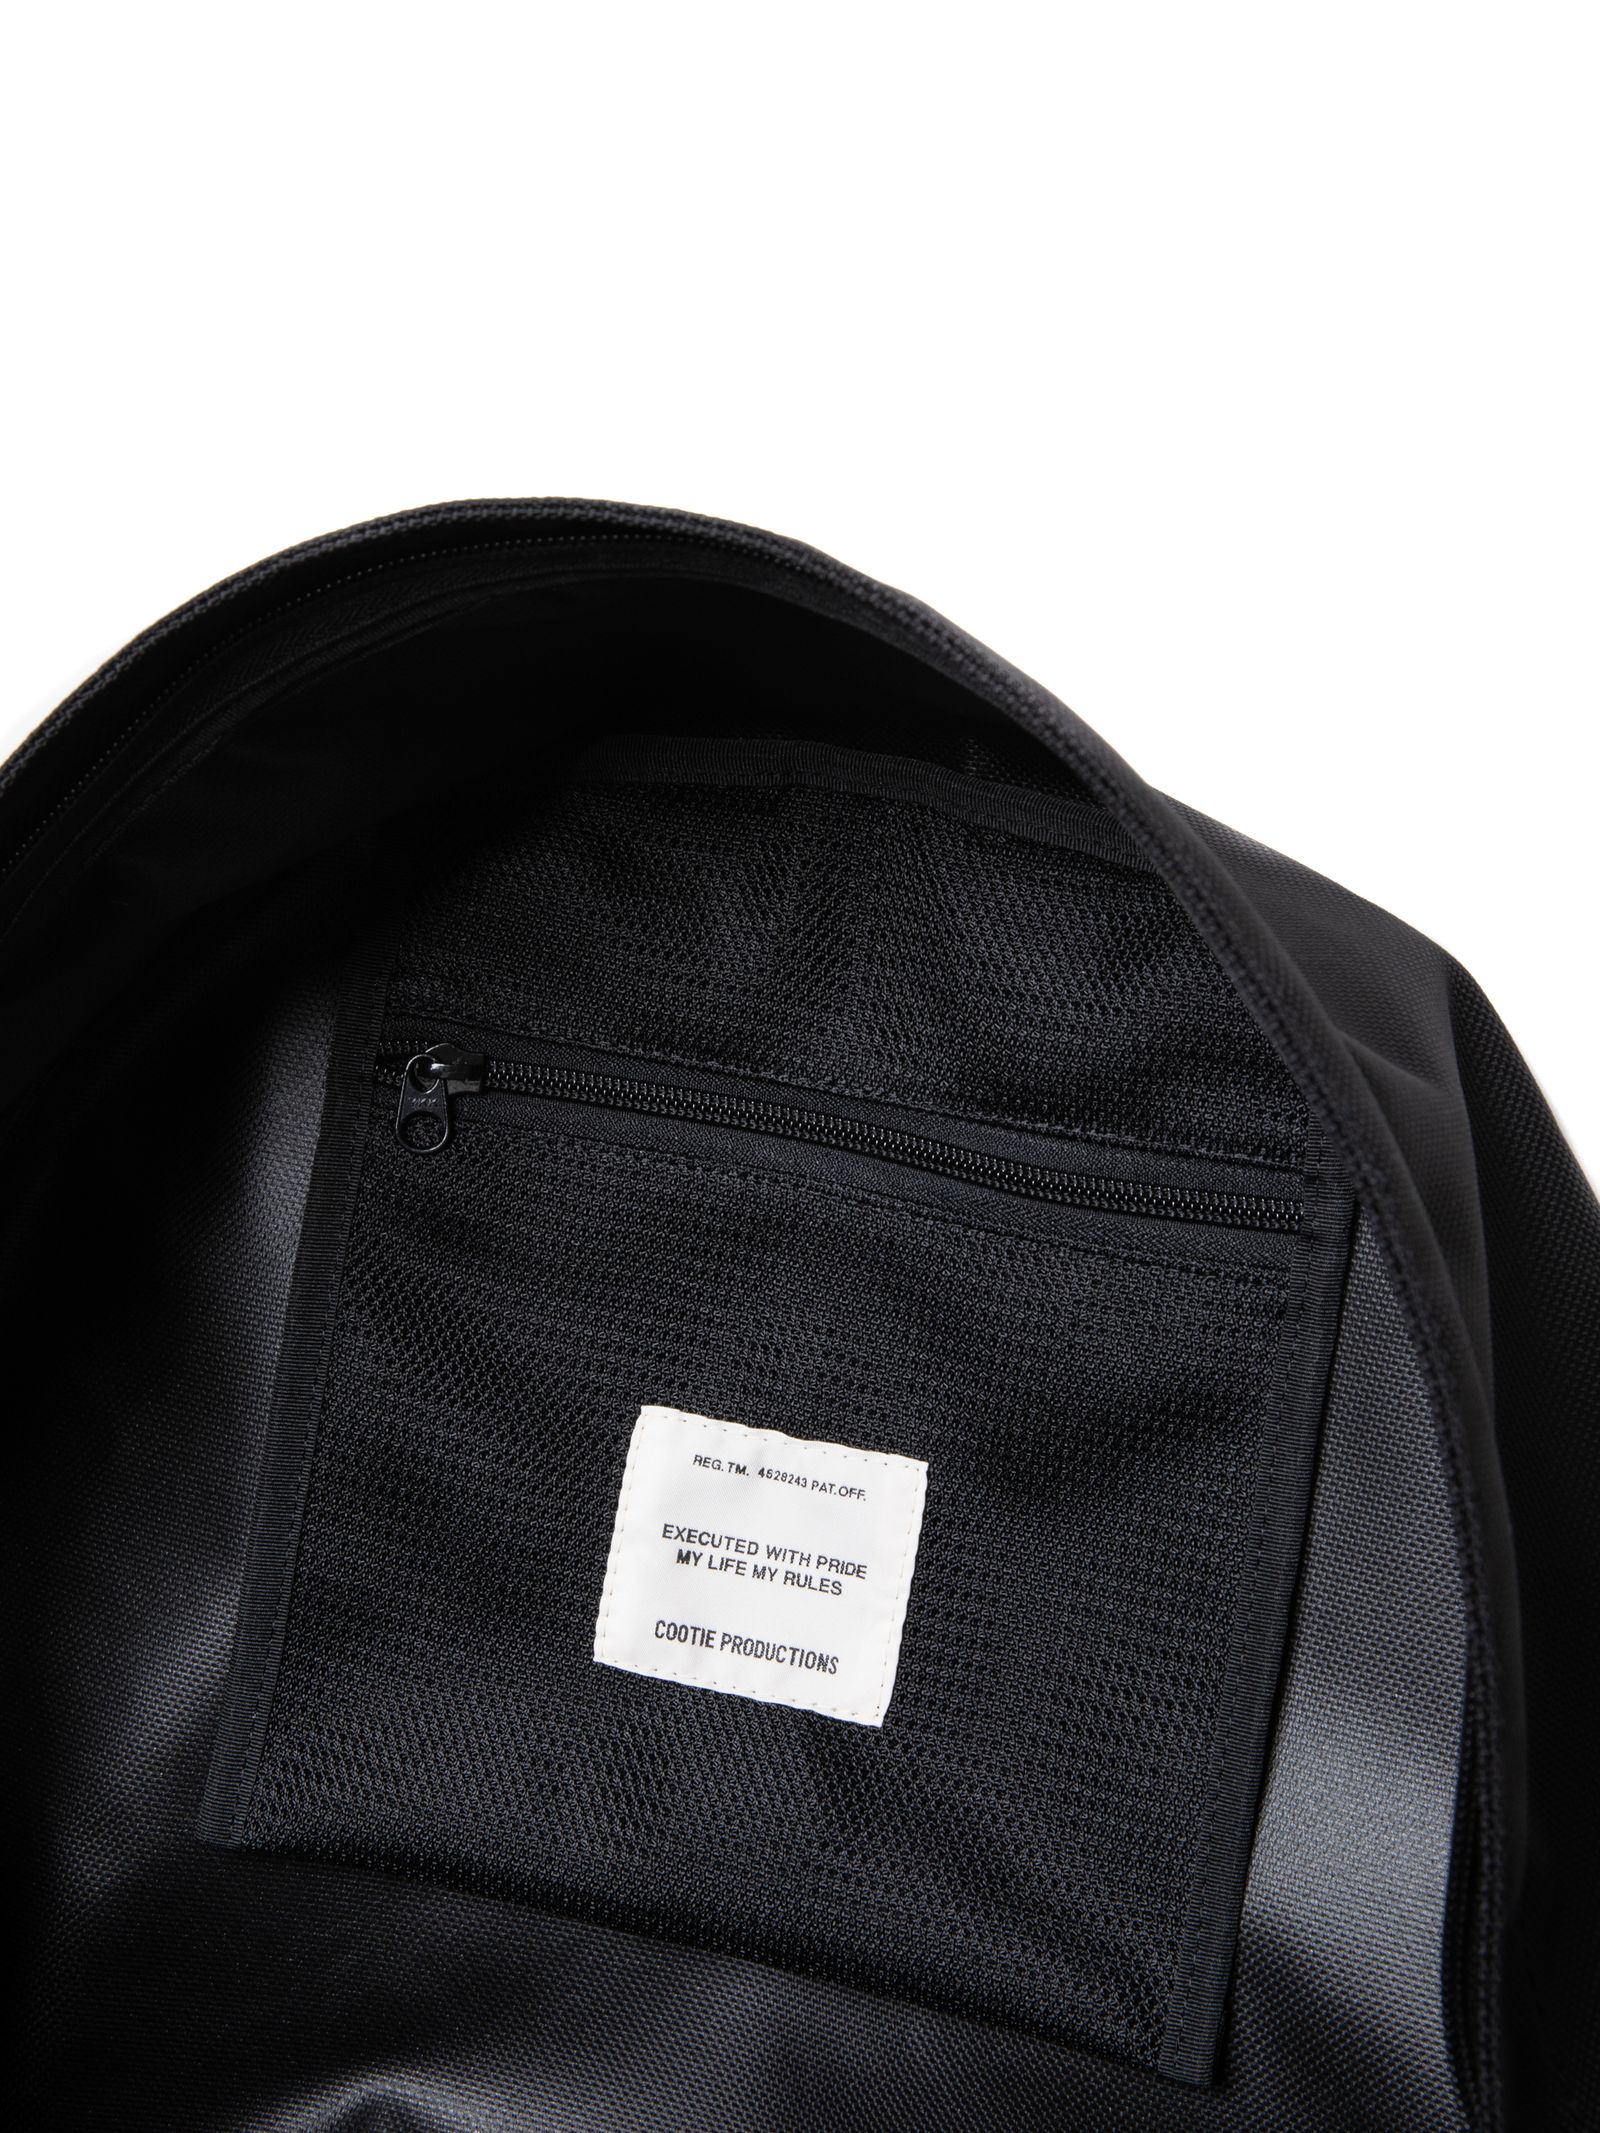 COOTIE PRODUCTIONS - STANDARD DAY PACK (BLACK